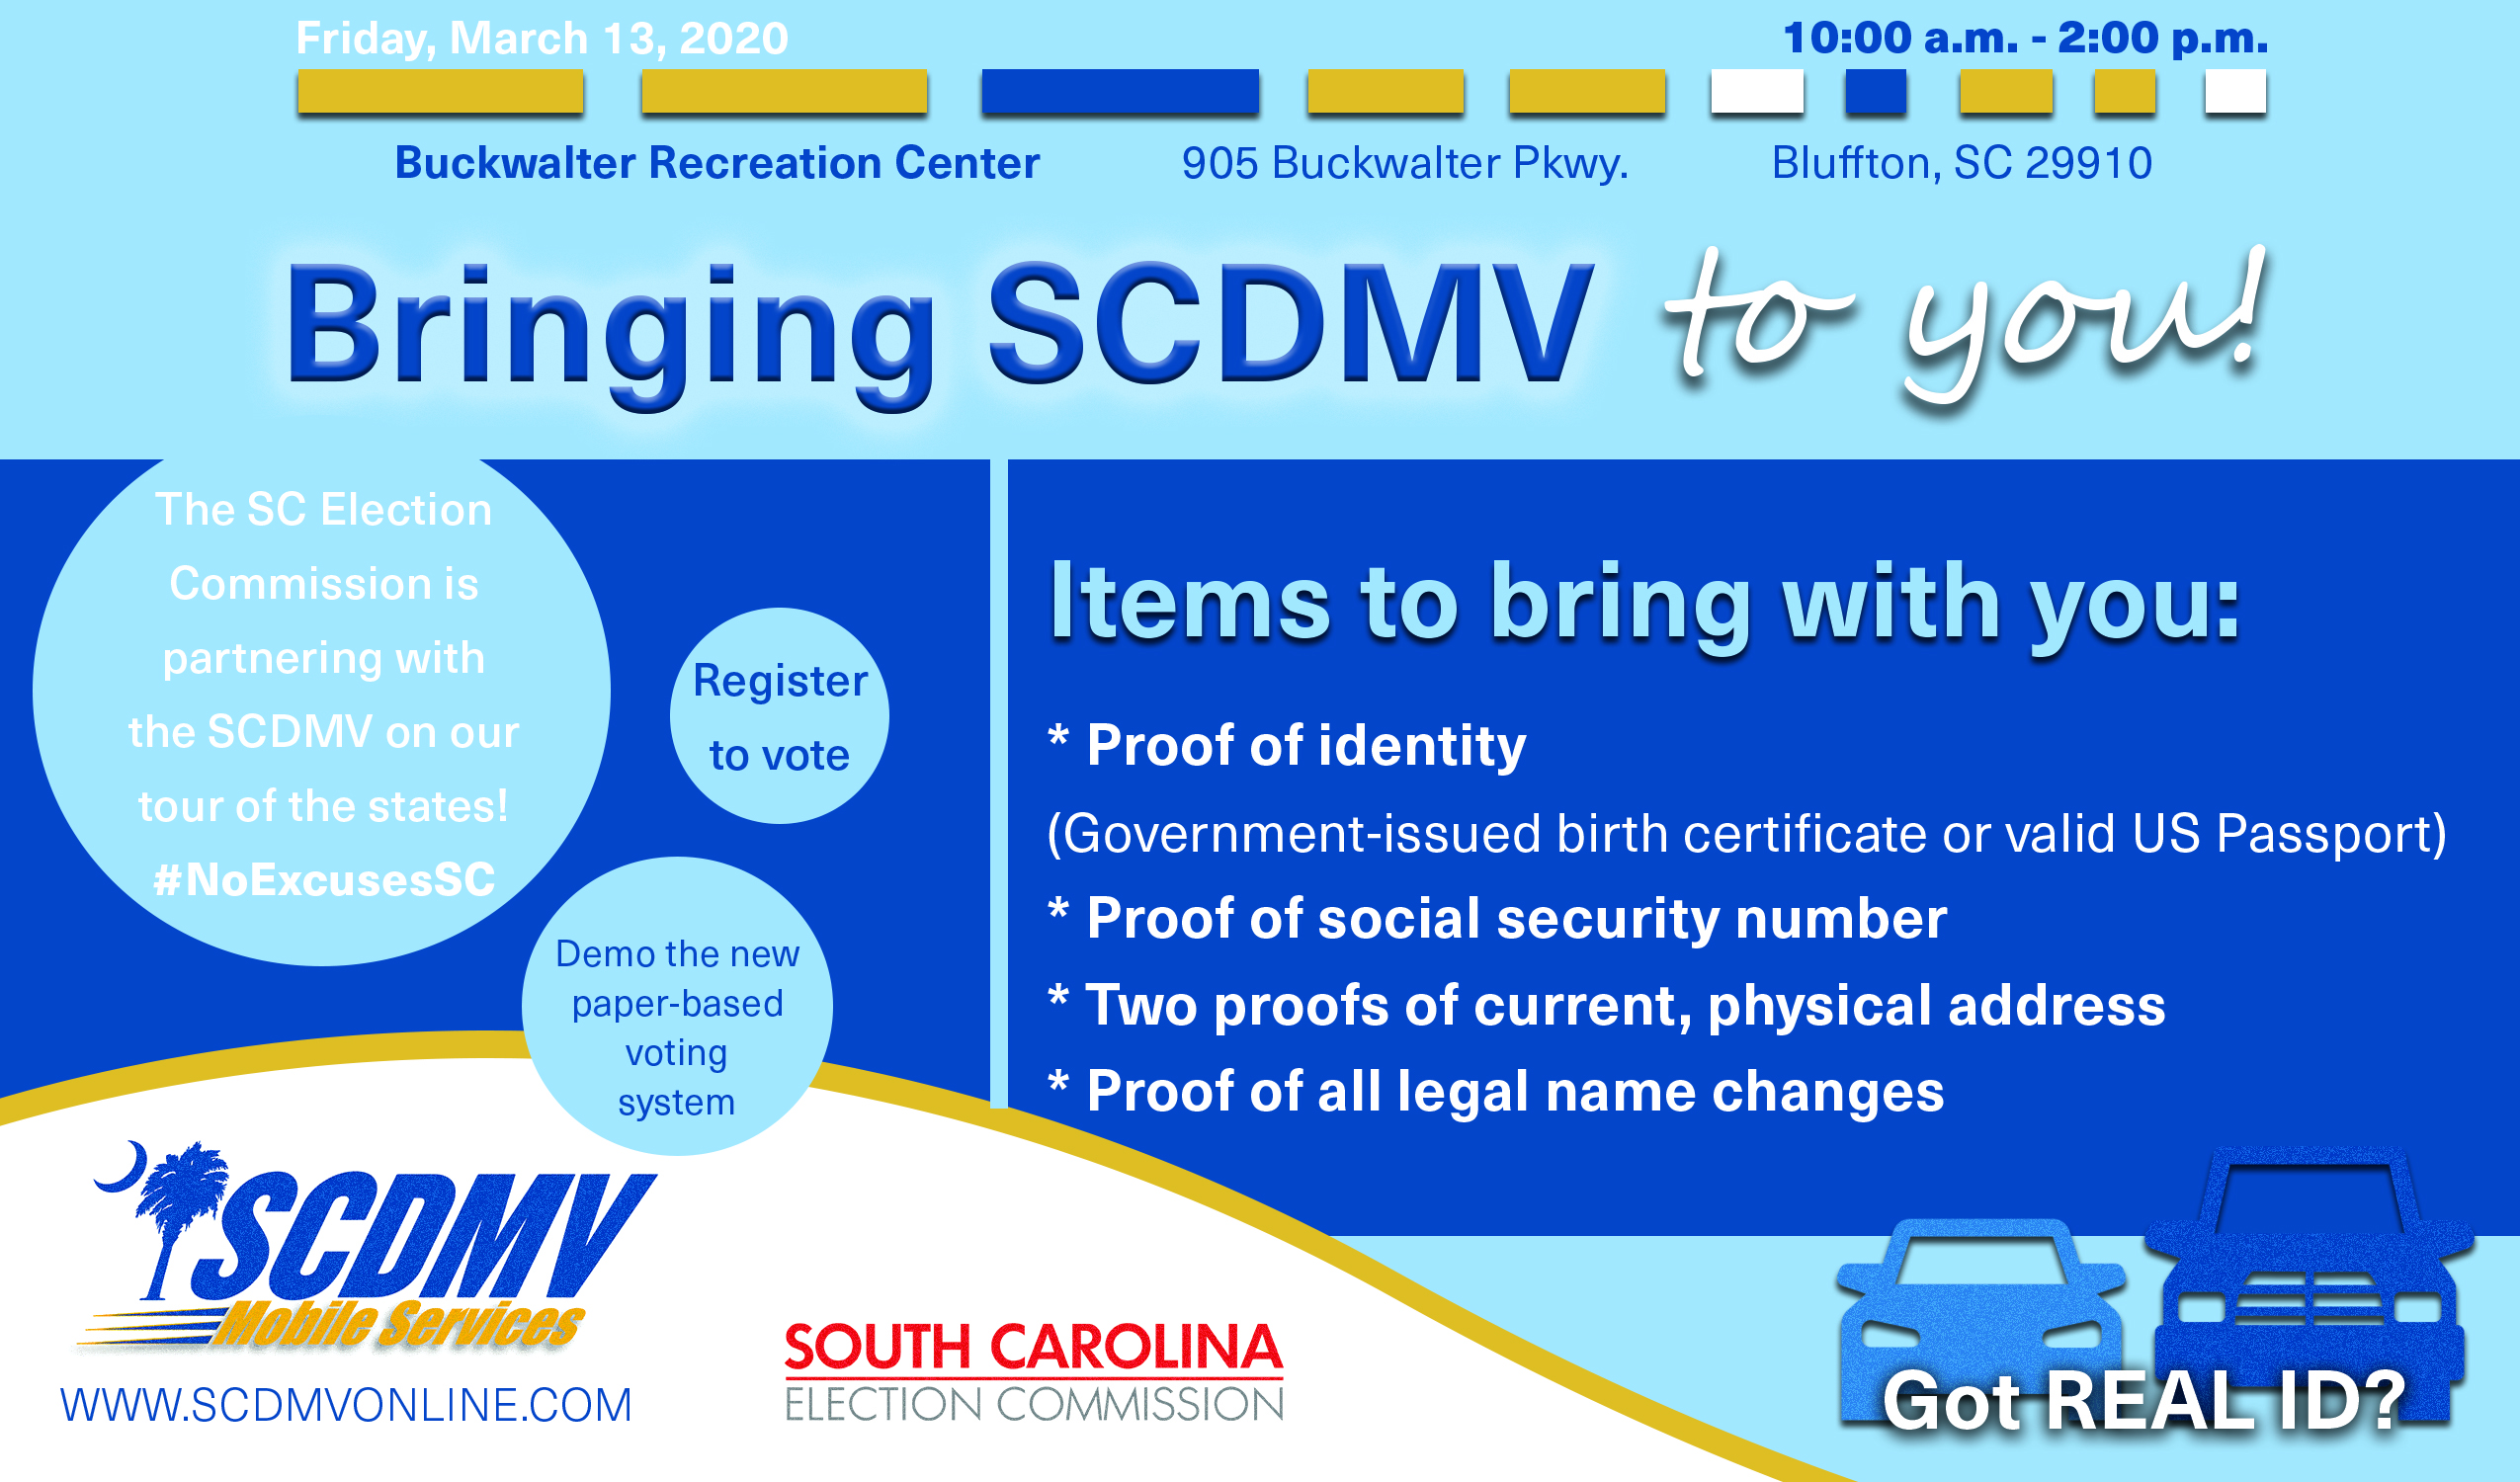 SC DMV Mobile Office and SC Election Commission to Visit Beaufort County for REAL ID and Voter Registration Outreach Event